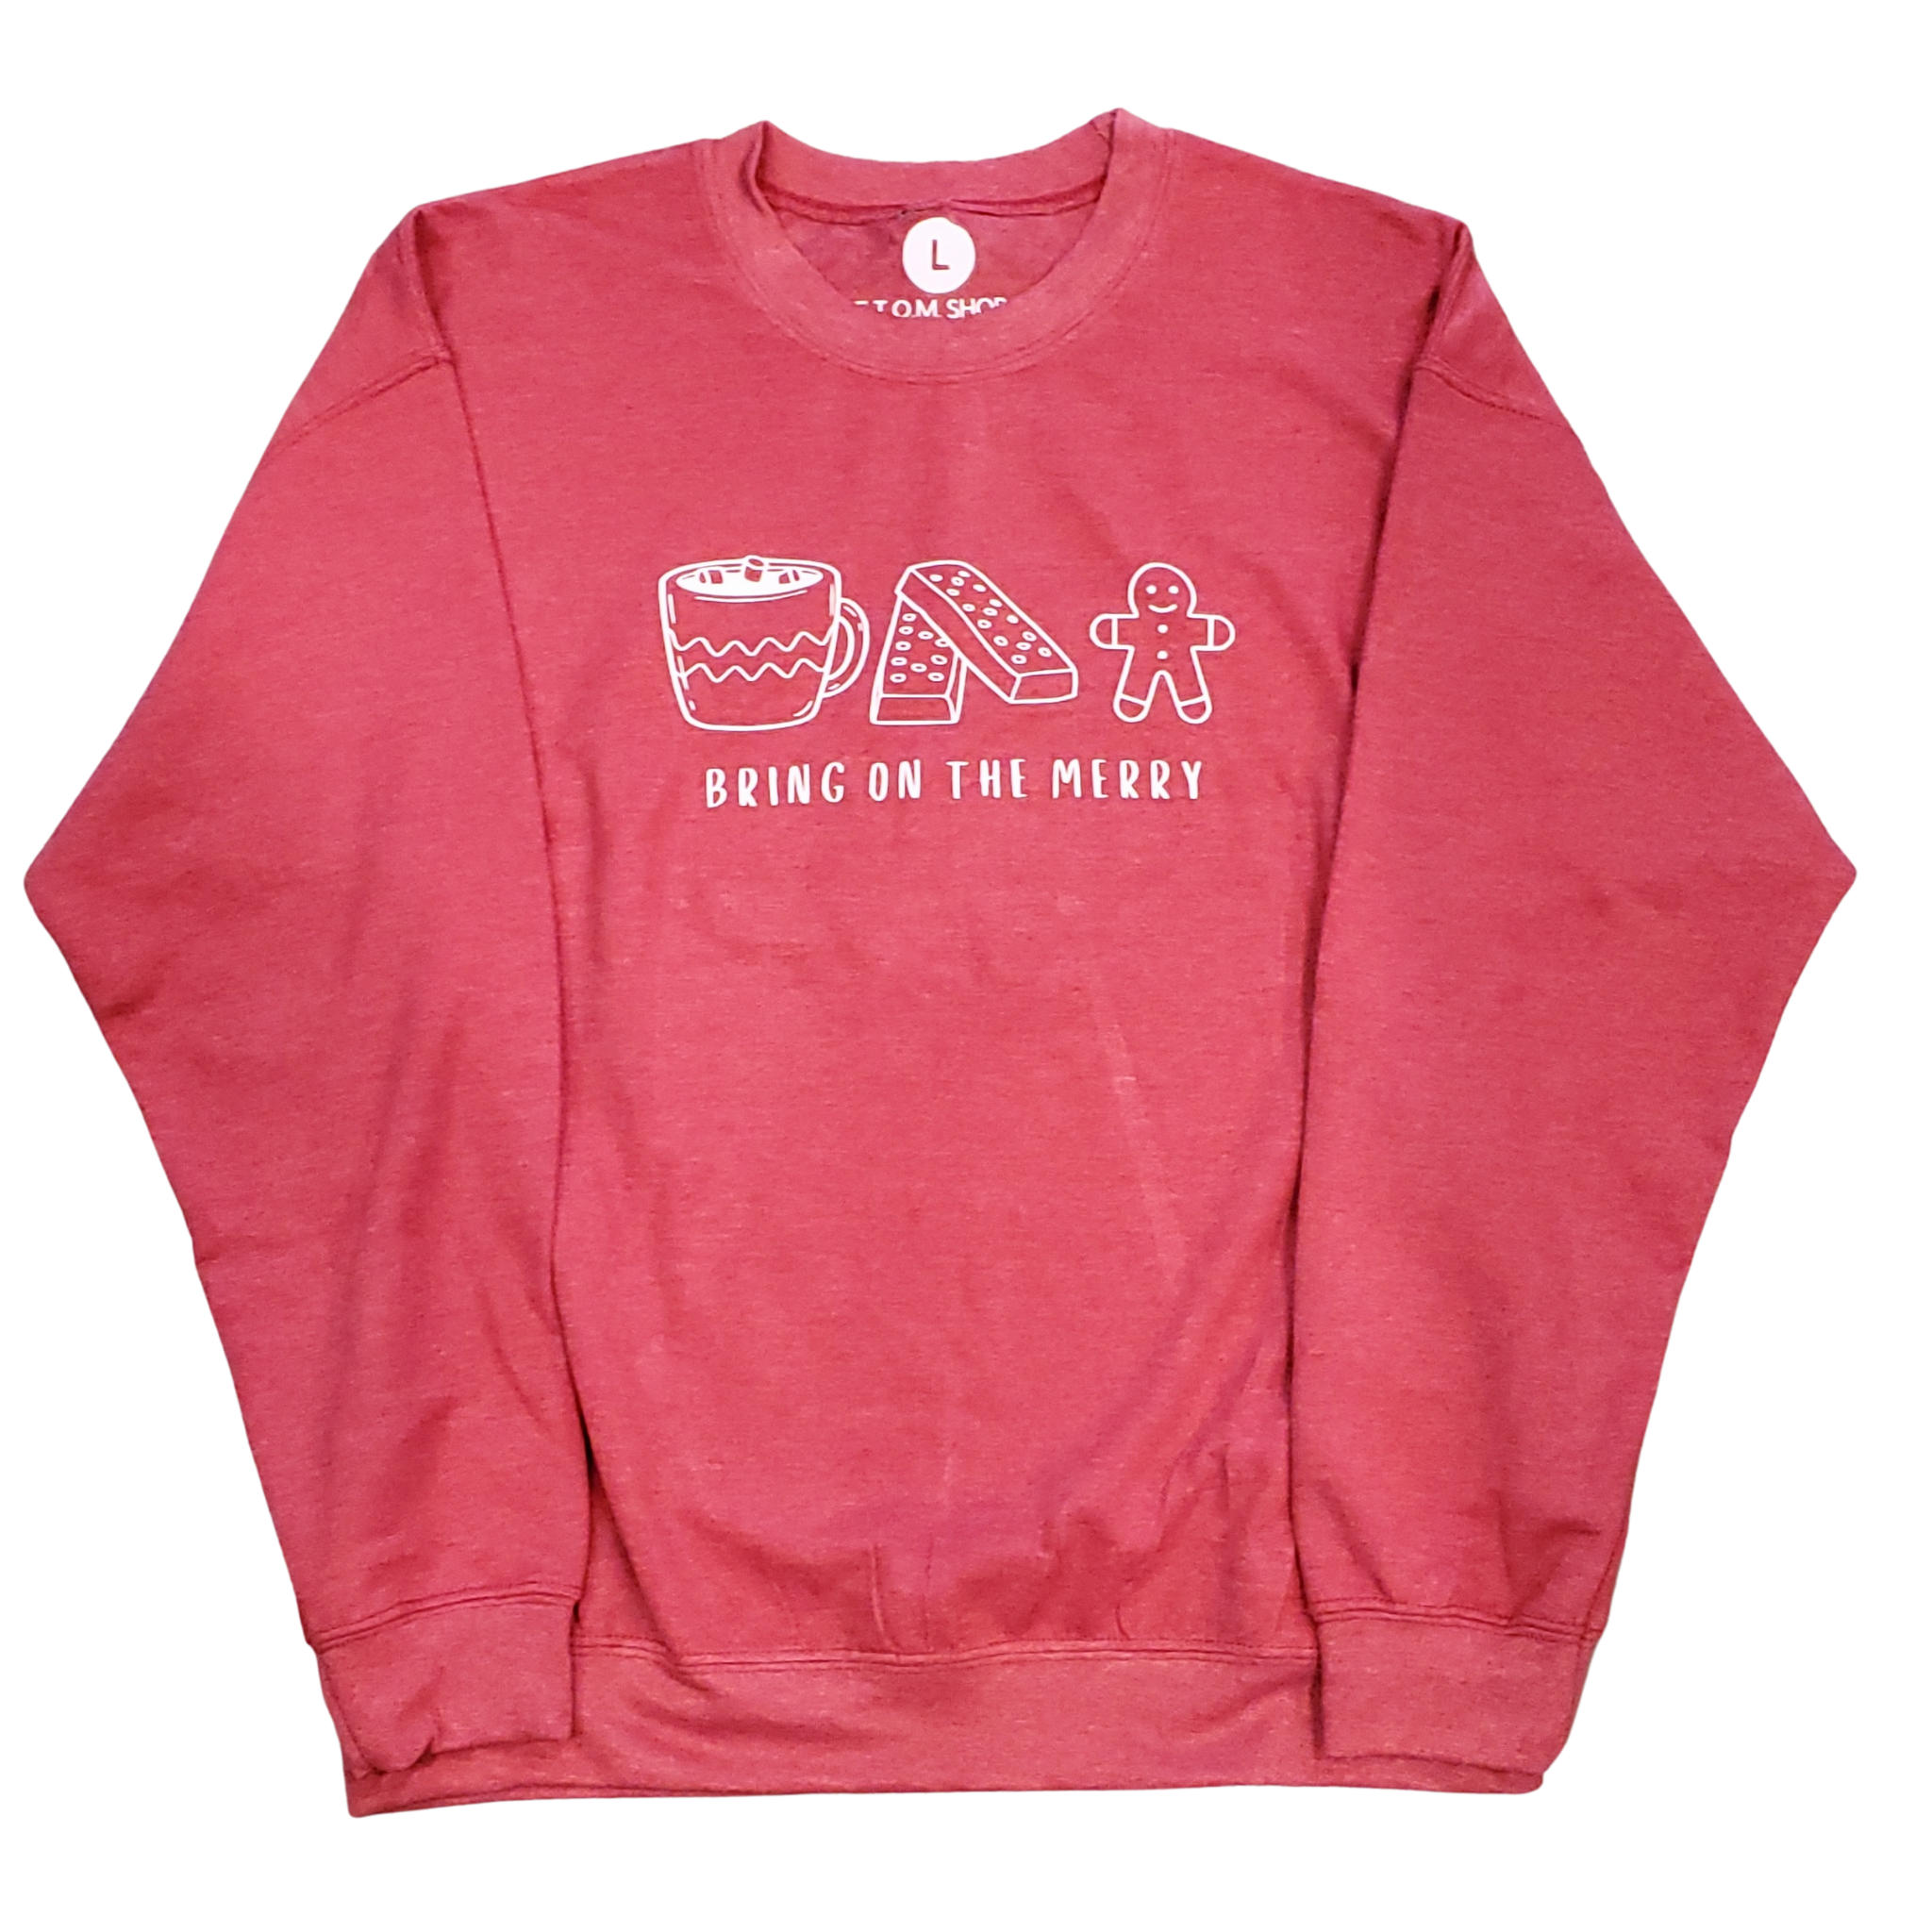 "BRING ON THE MERRY" - Sweatshirt - Heather Red